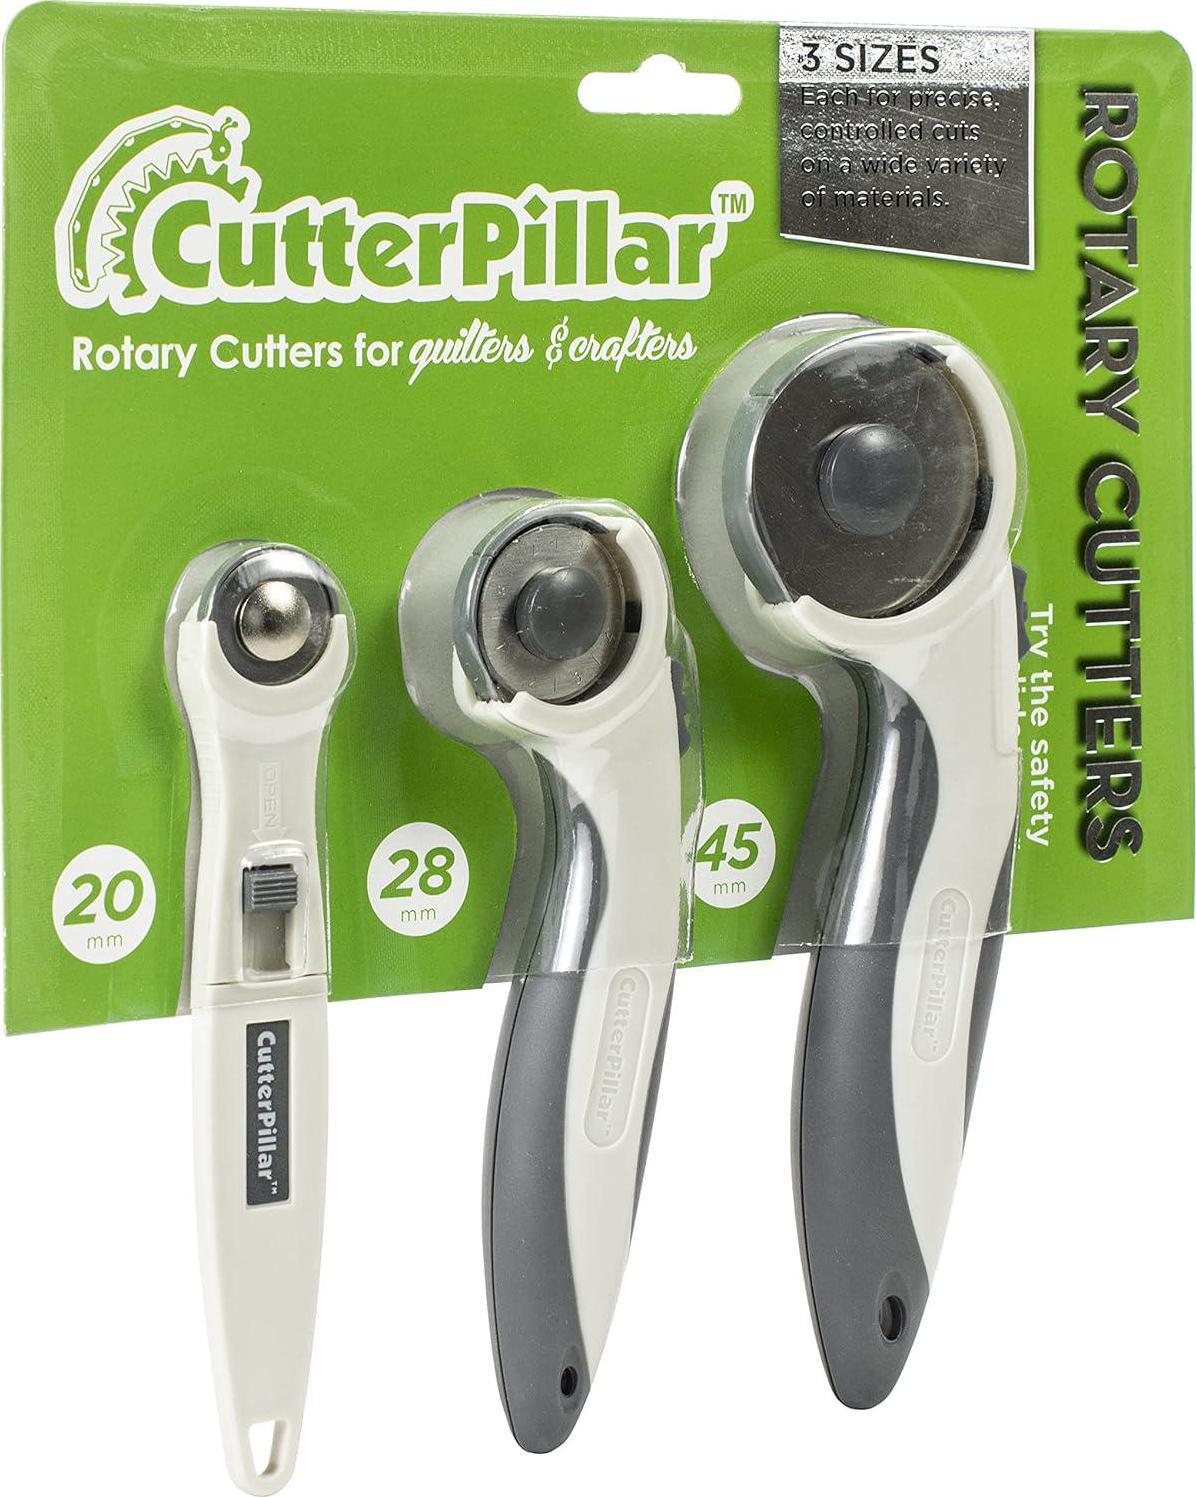 Rotary Cutter Set,Nicecho Sewing Quilting Supplies,45mm & 28 mm Fabric